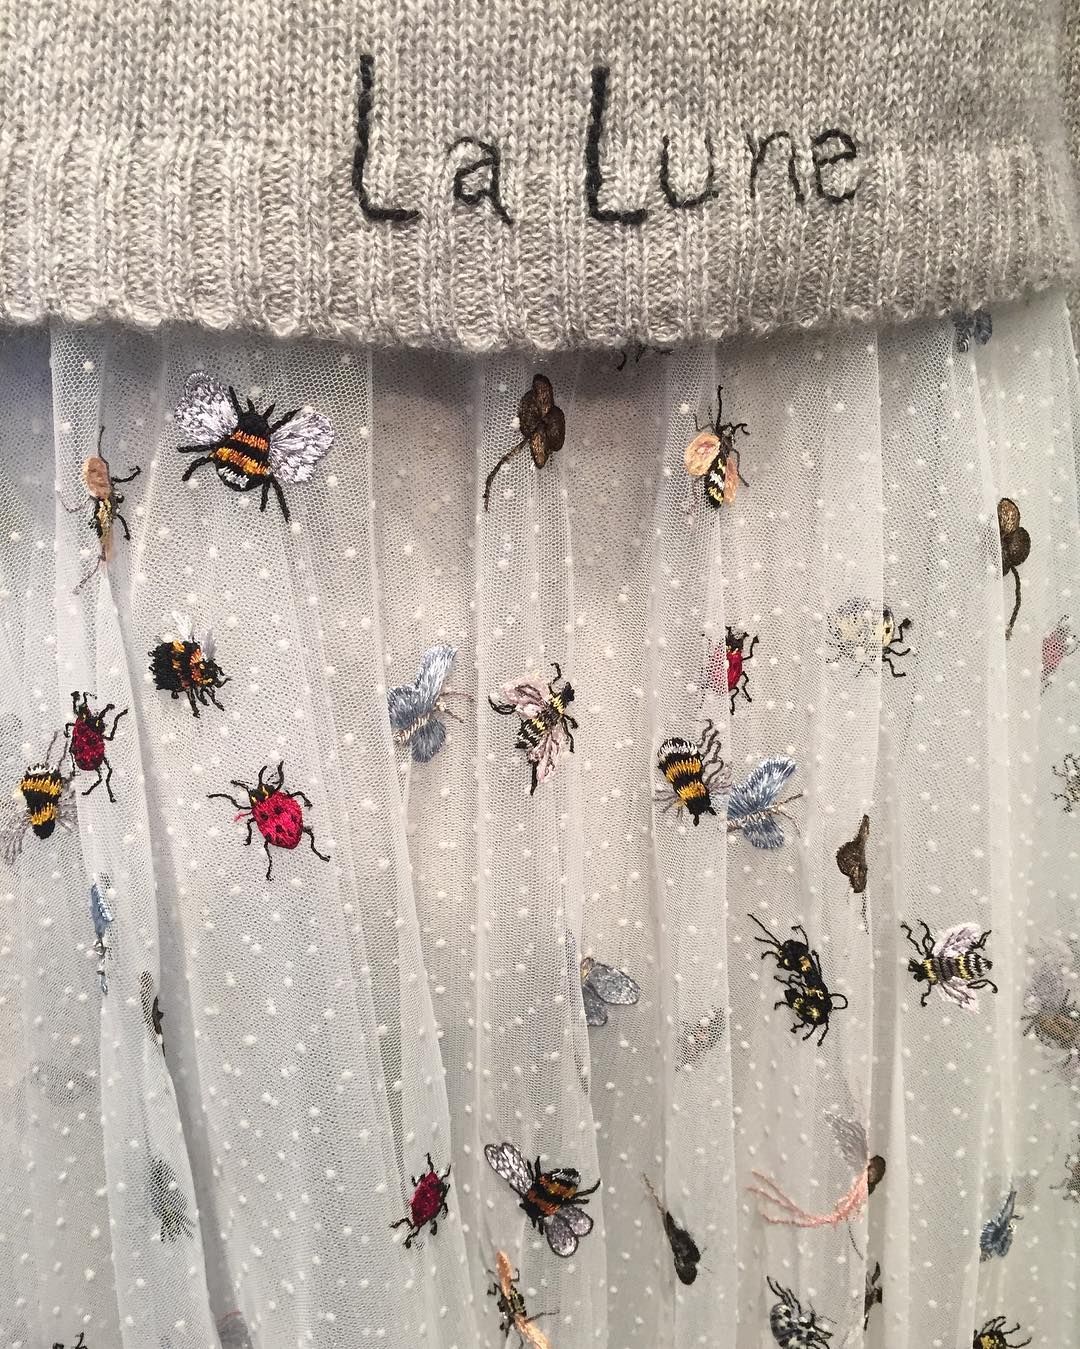 Dior Avenue Montaigne. Dior up close, via Cécile Narinx, Editor in Chief, Harpers Bazaar Netherlands. Insect & bees embroidery